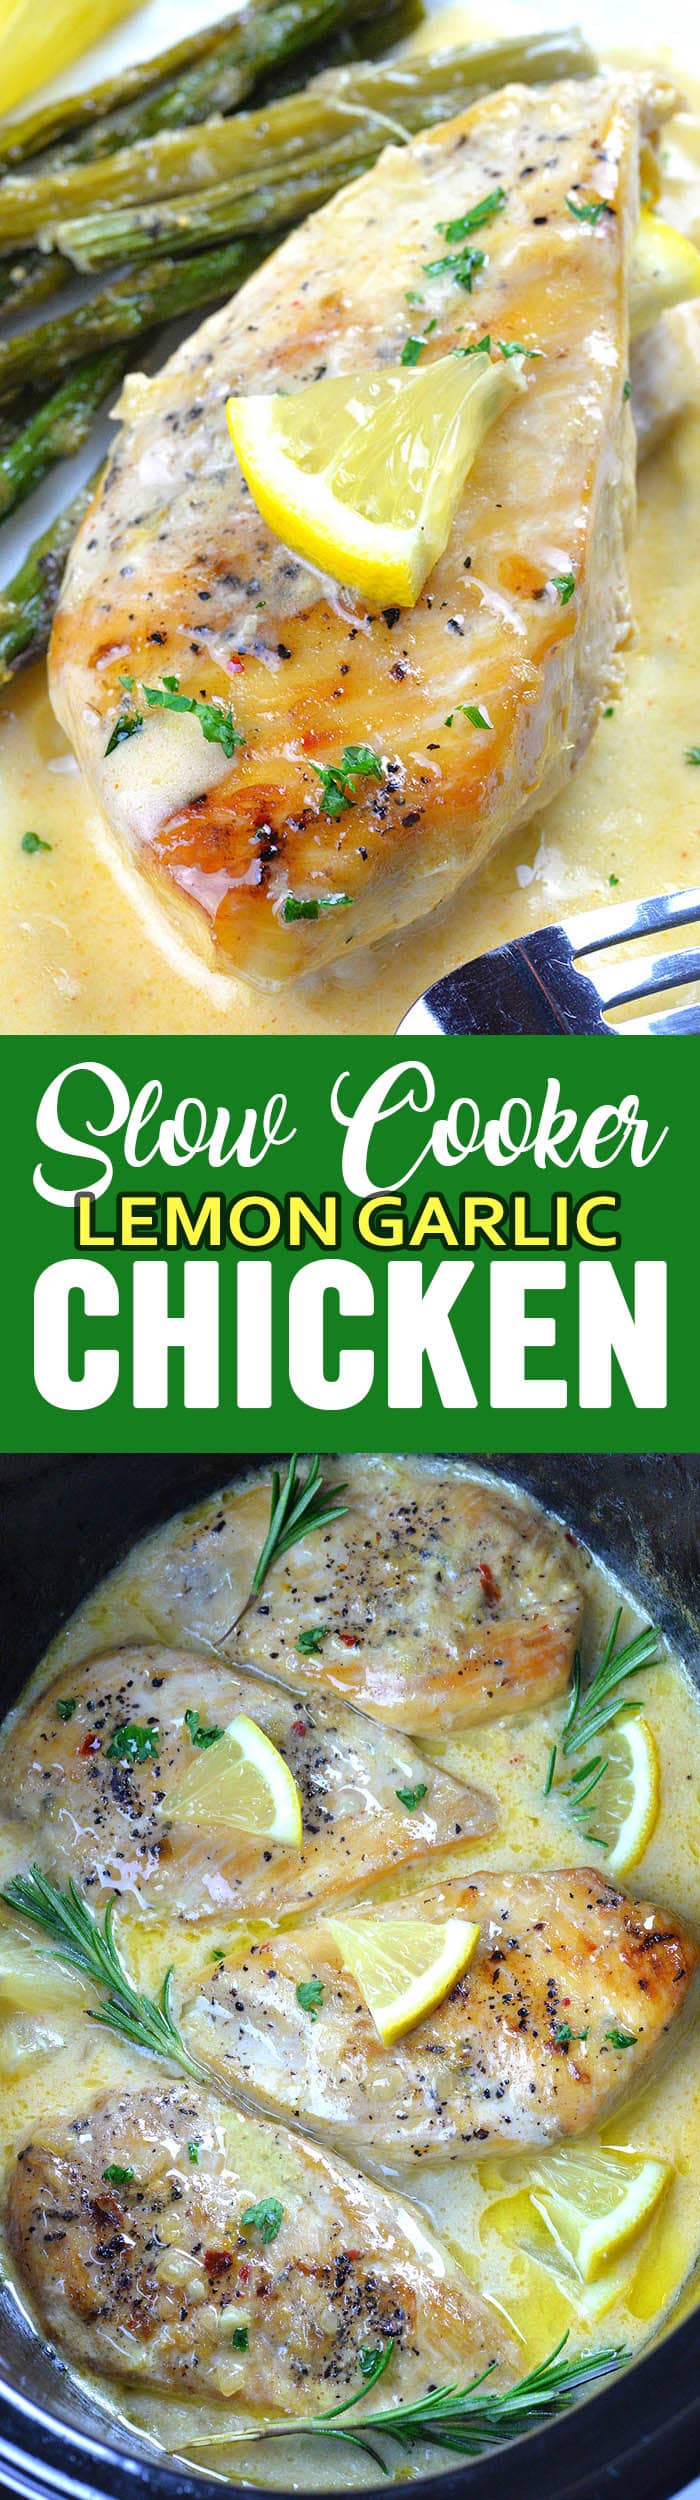 Slow Cooker Chicken Recipes are my favorites weeknight dinners for whole family. Chicken cooked in slow cooker turns out so juicy and always full of flavors. 